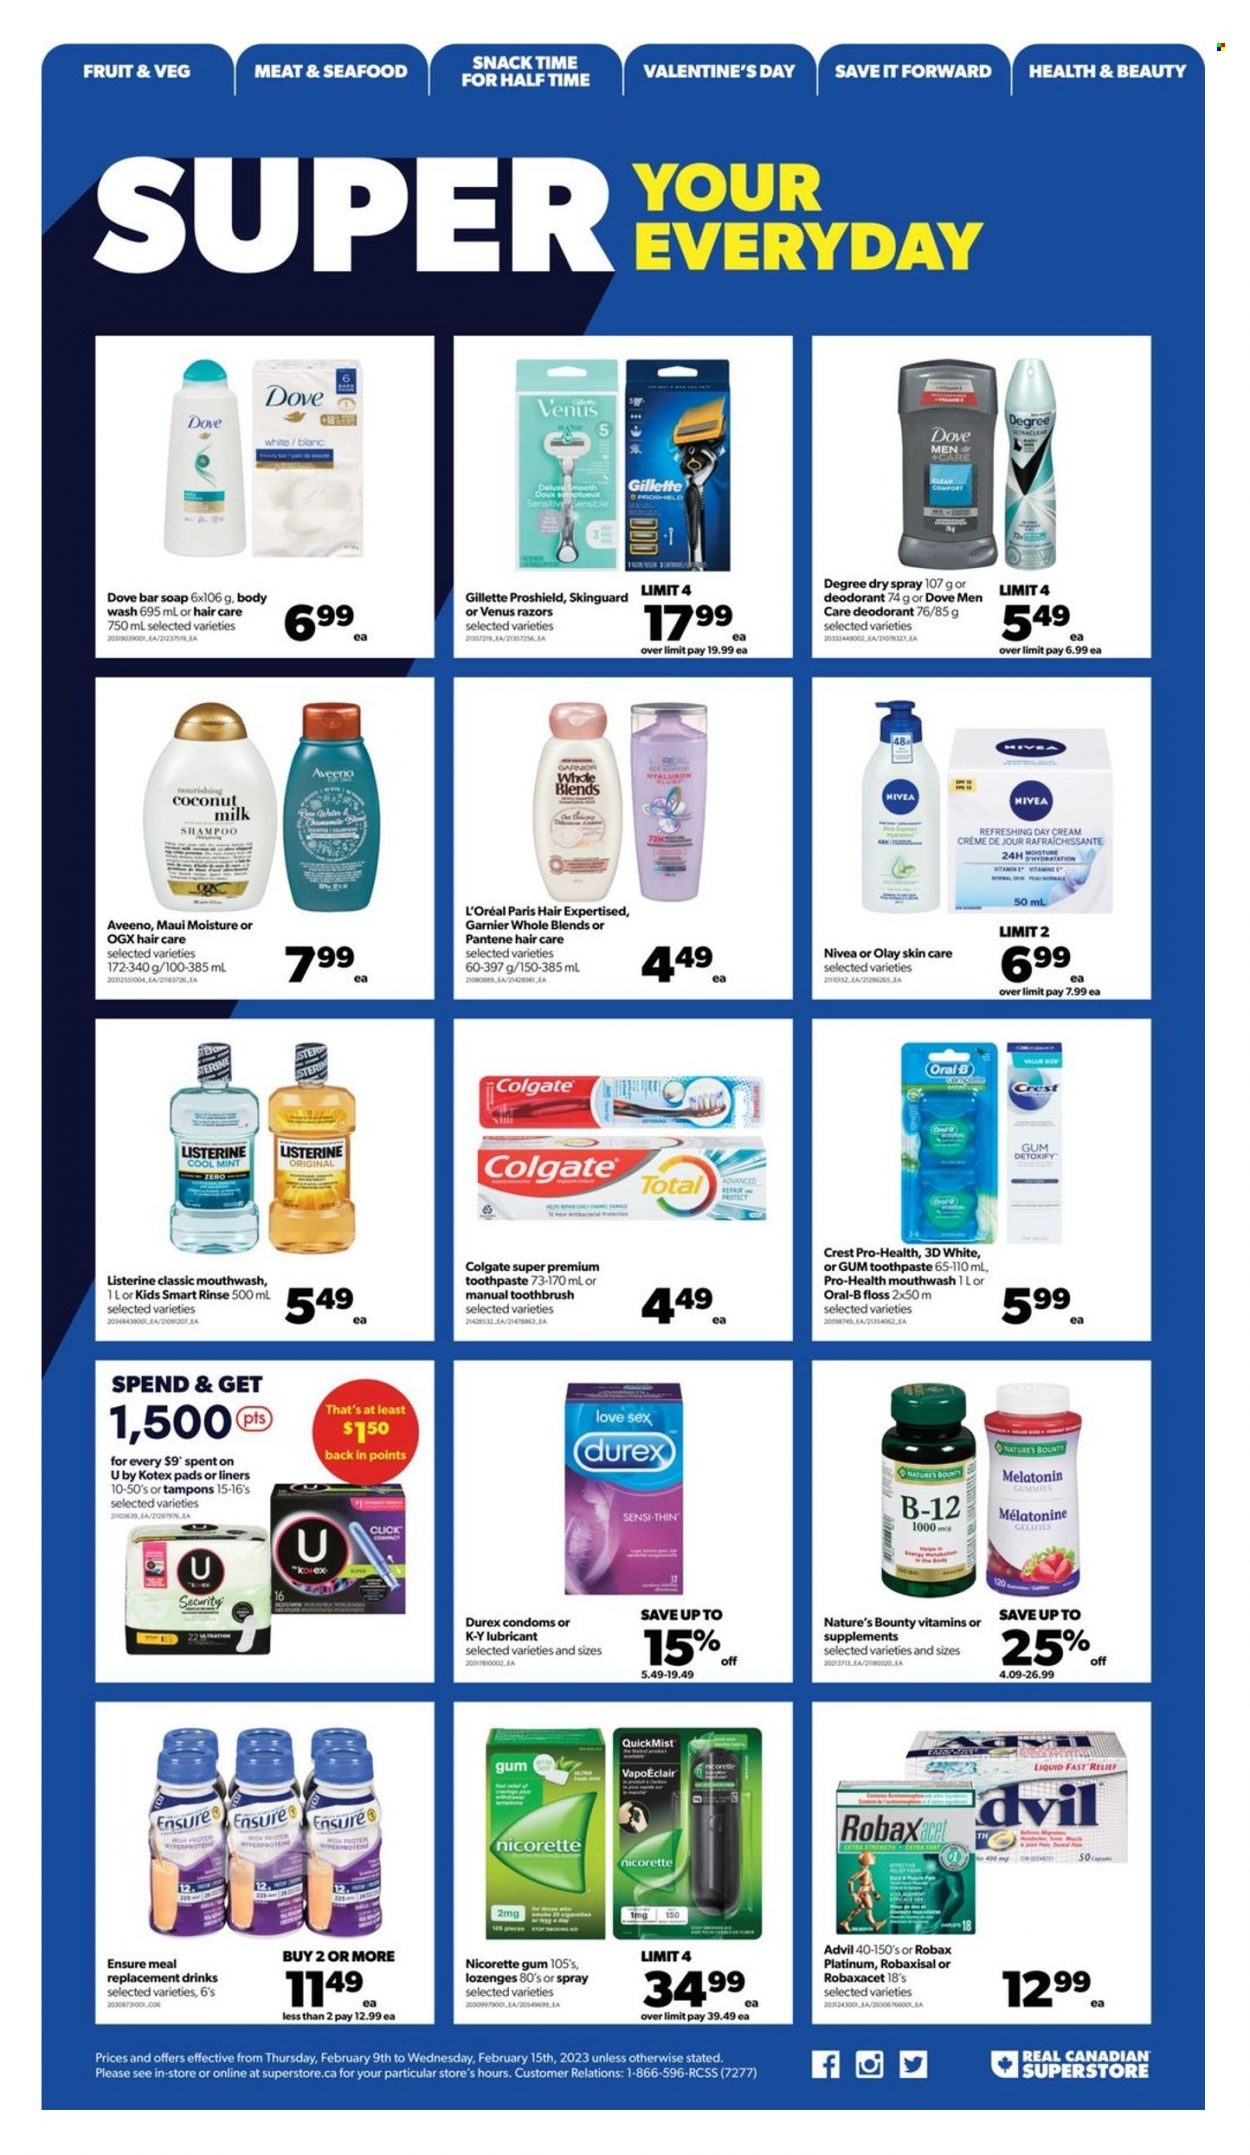 thumbnail - Real Canadian Superstore Flyer - February 09, 2023 - February 15, 2023 - Sales products - seafood, Dove, snack, coconut milk, L'Or, Aveeno, Nivea, body wash, soap bar, soap, toothbrush, toothpaste, mouthwash, Crest, sanitary pads, Kotex, Kotex pads, tampons, day cream, Gillette, L’Oréal, Olay, OGX, Pantene, Maui Moisture, anti-perspirant, Venus, lubricant, Melatonin, Nature's Bounty, Nicorette, Advil Rapid, Nicorette Gum, Colgate, Garnier, Listerine, shampoo, Oral-B, deodorant. Page 19.